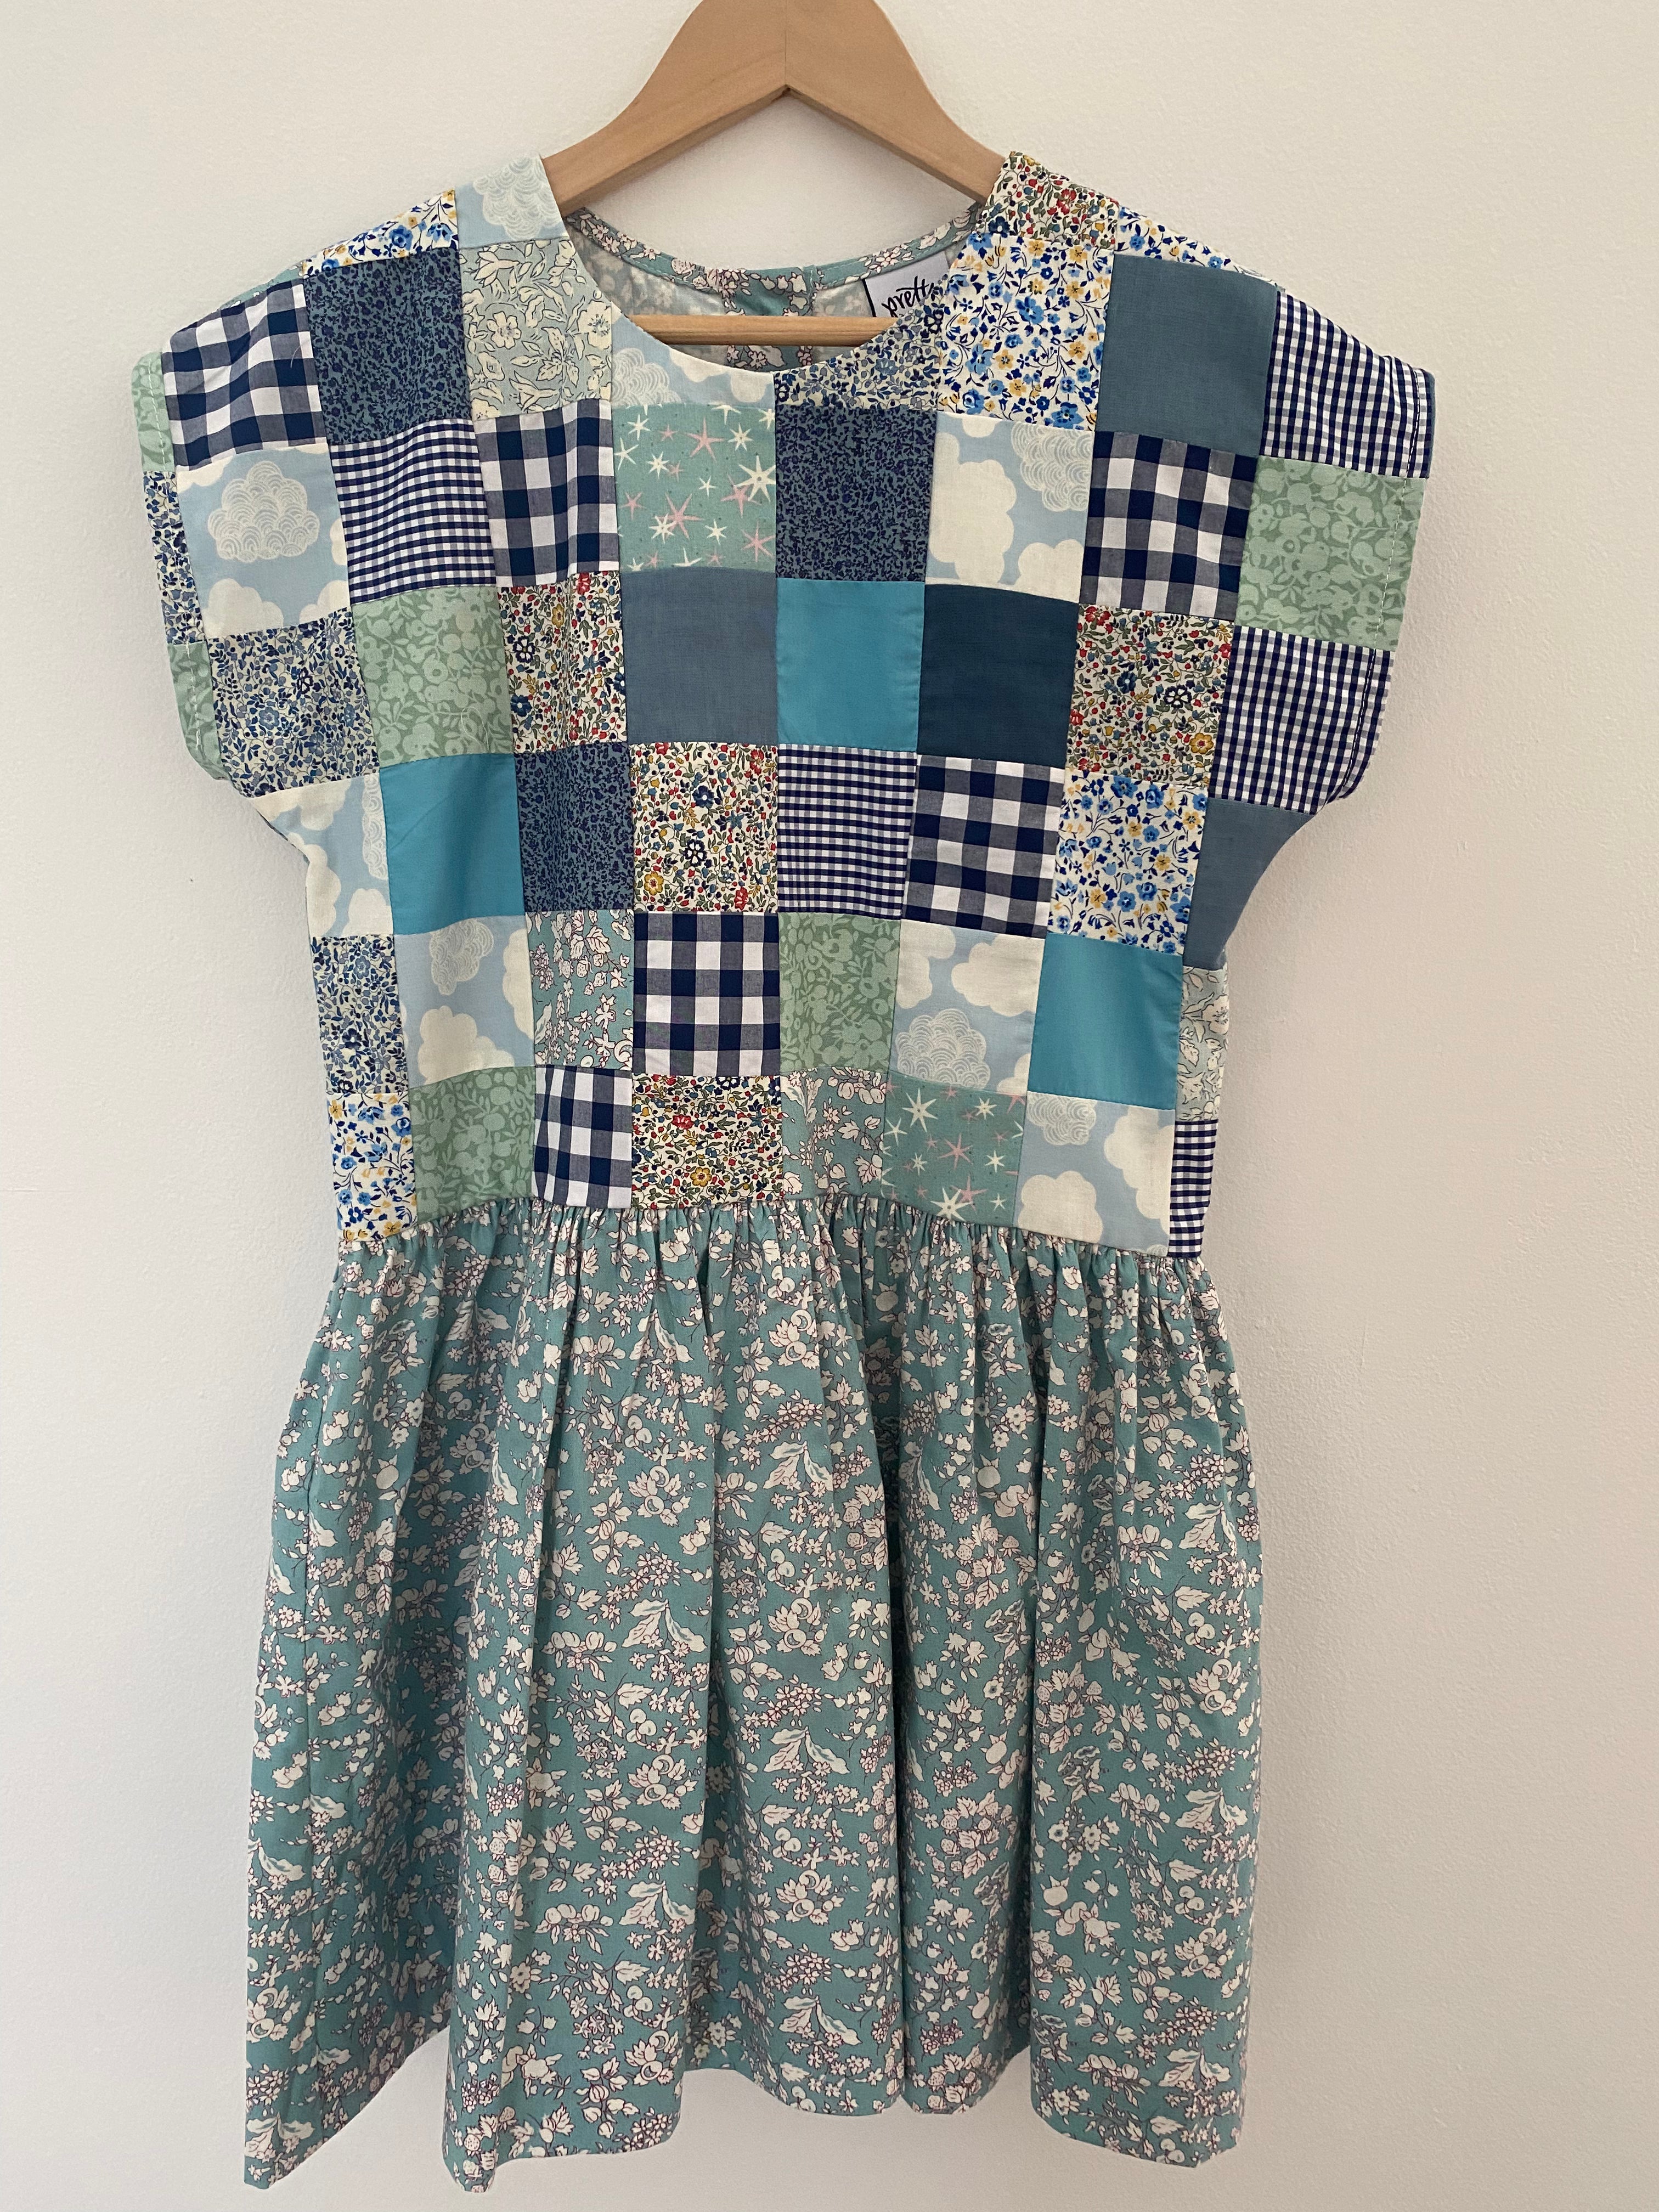 Maggie Patchwork Dress Silhouette 8y